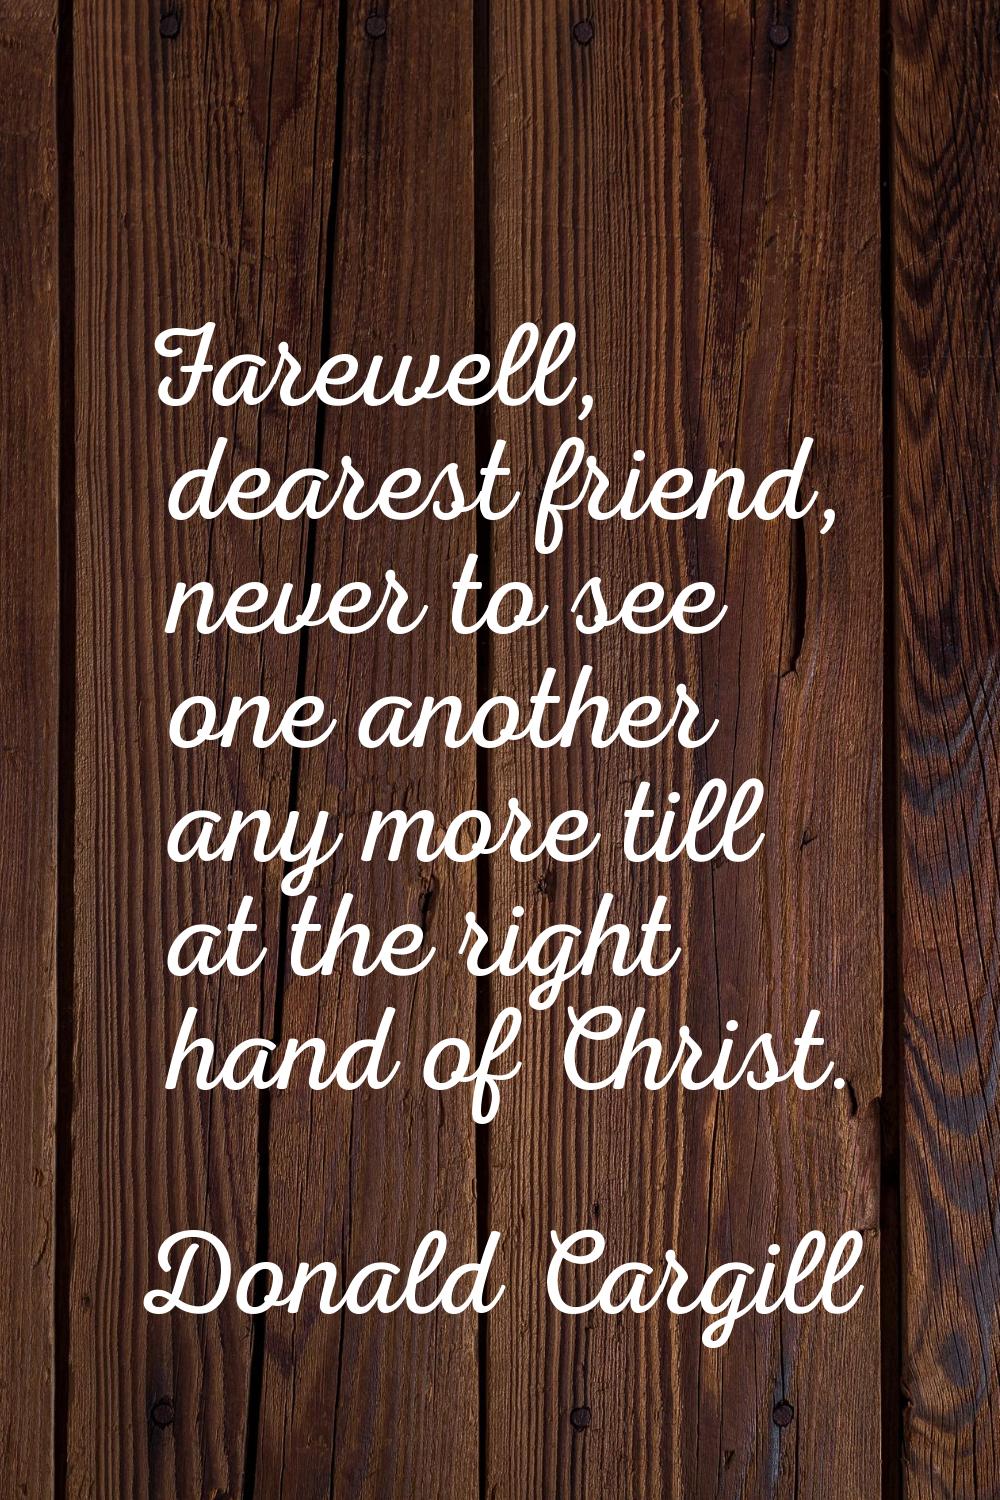 Farewell, dearest friend, never to see one another any more till at the right hand of Christ.